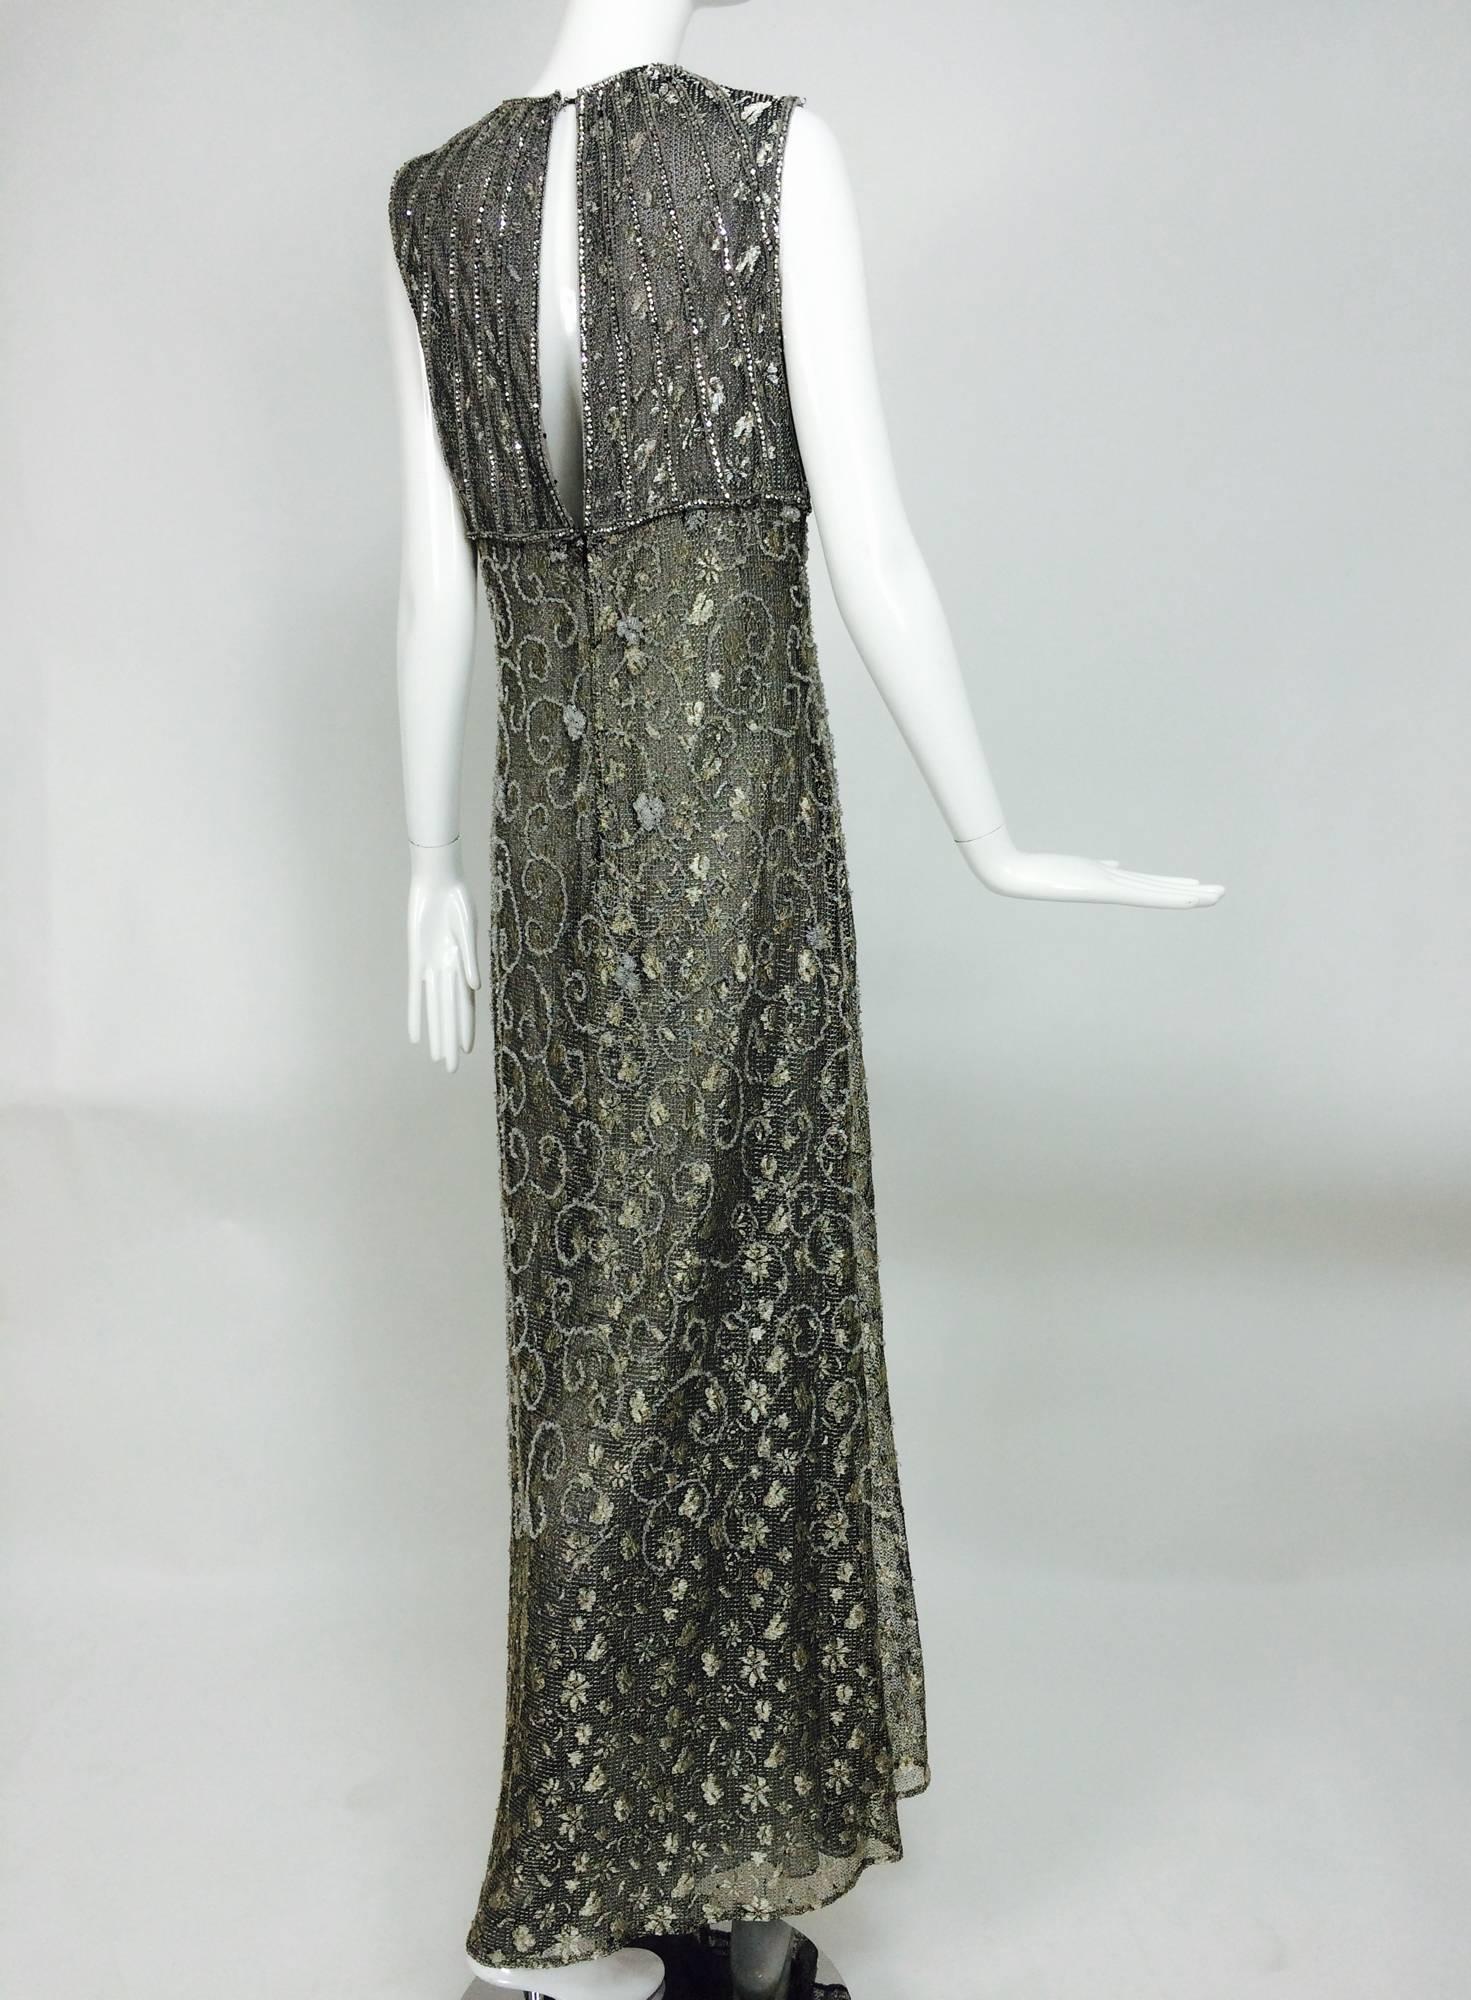 Black Badgley Mischka embroidered & beaded silver metallic lace gown